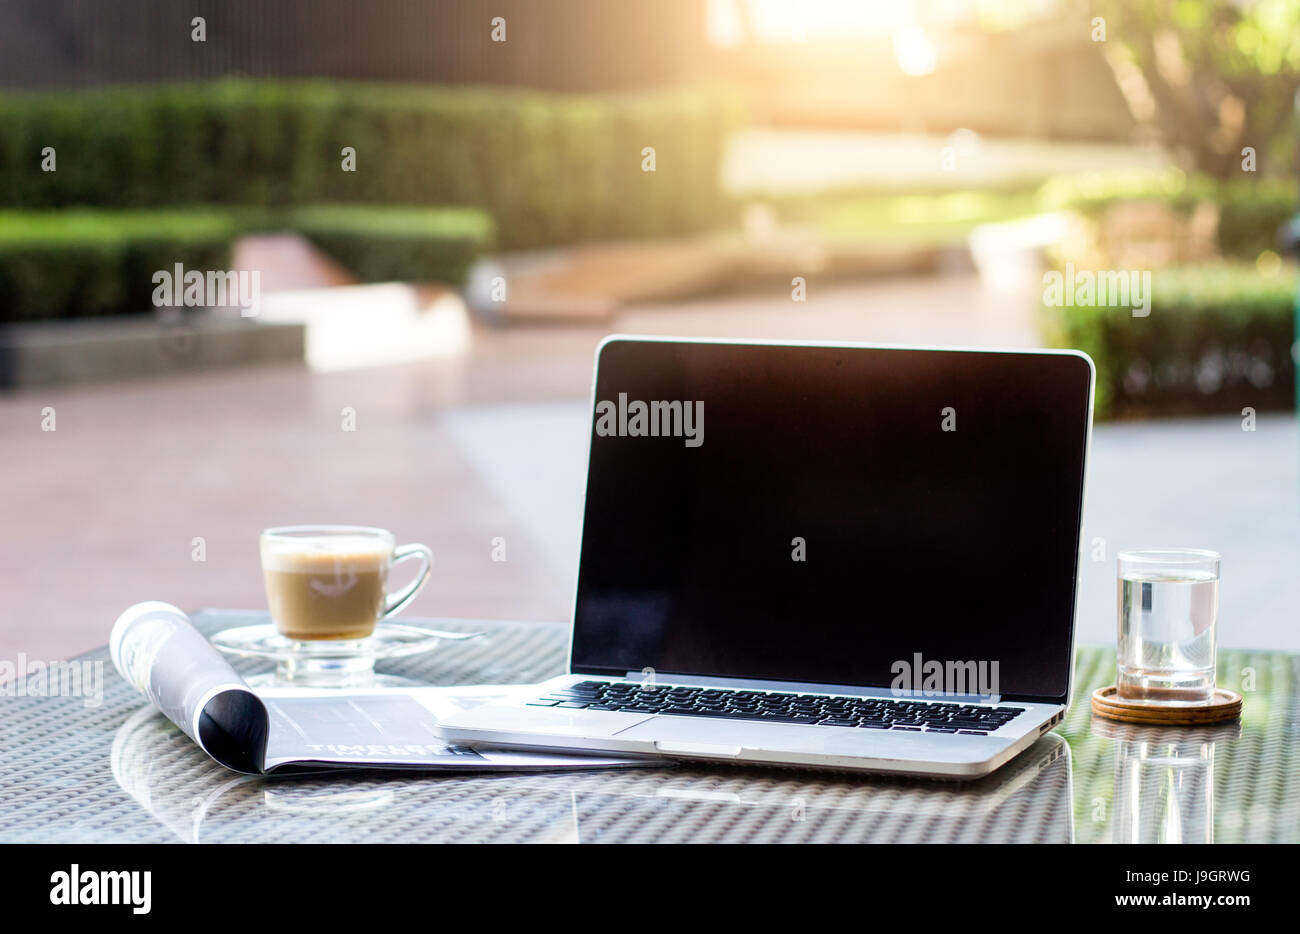 select focus blank mornitor for copy space laptop on table with mobile phone and drink unplug freelance work life Stock Photo